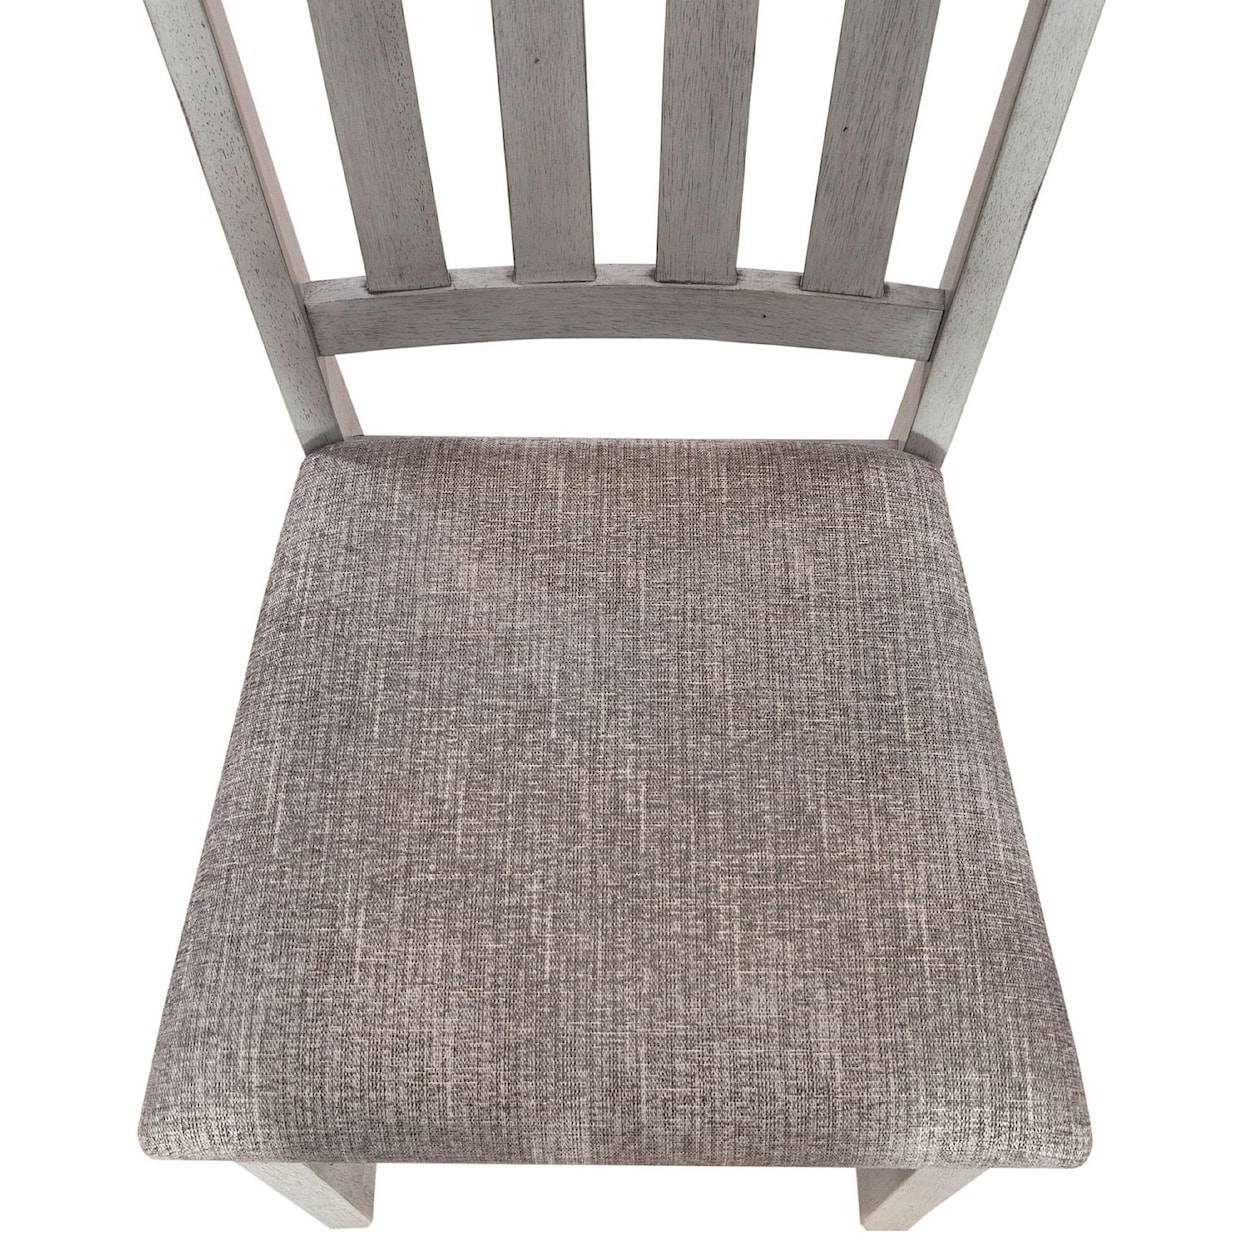 Libby Newport Dining Side Chair